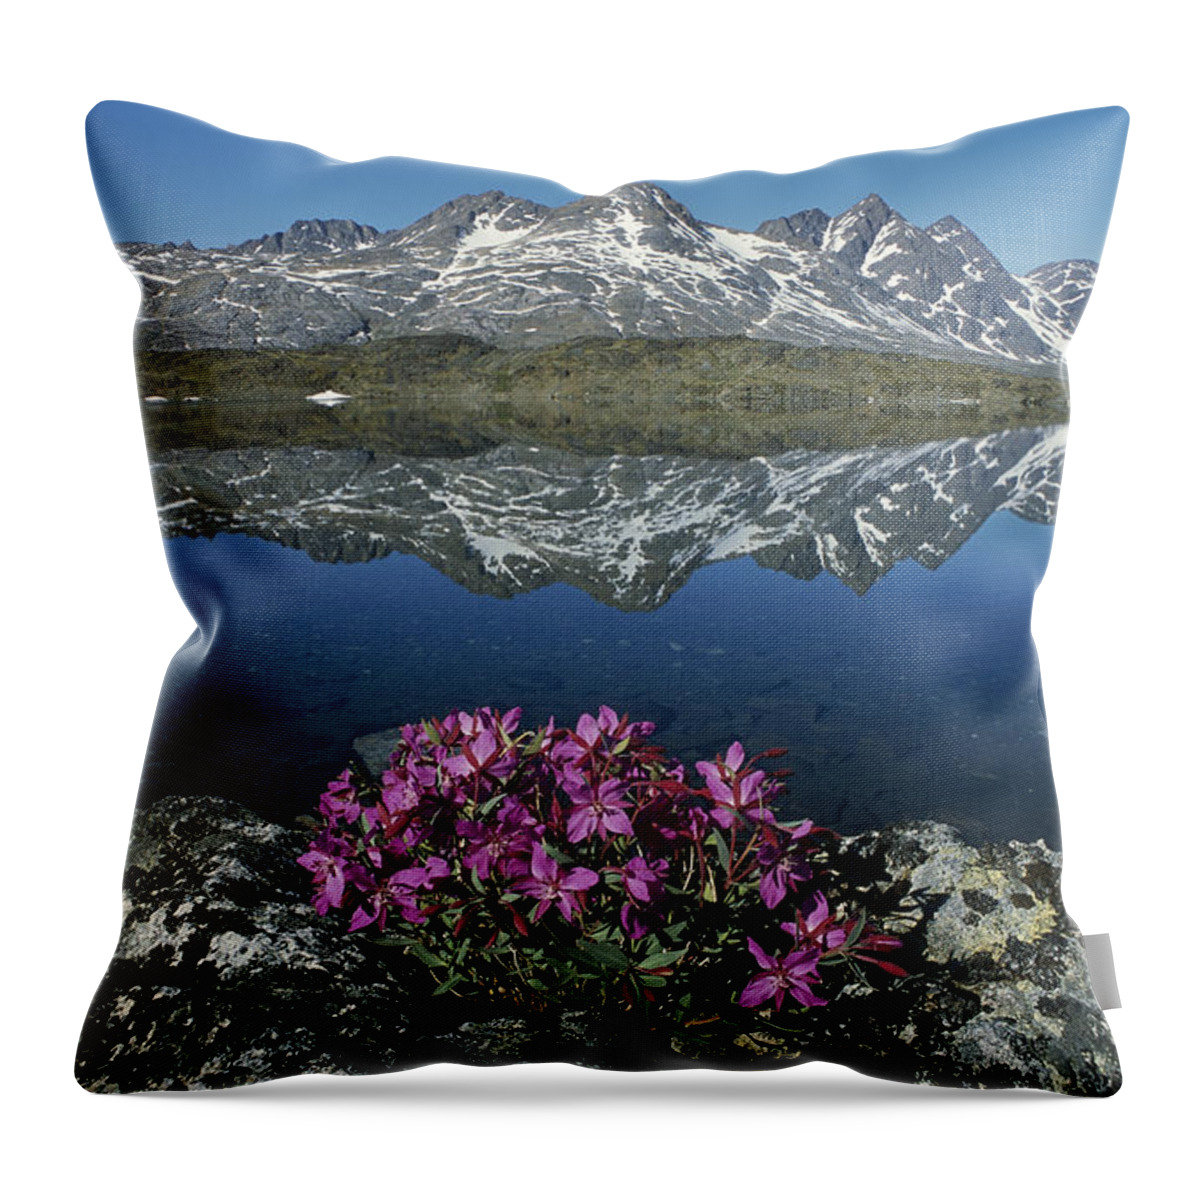 Feb0514 Throw Pillow featuring the photograph Dwarf Fireweed With Mountains Greenland by Grant Dixon